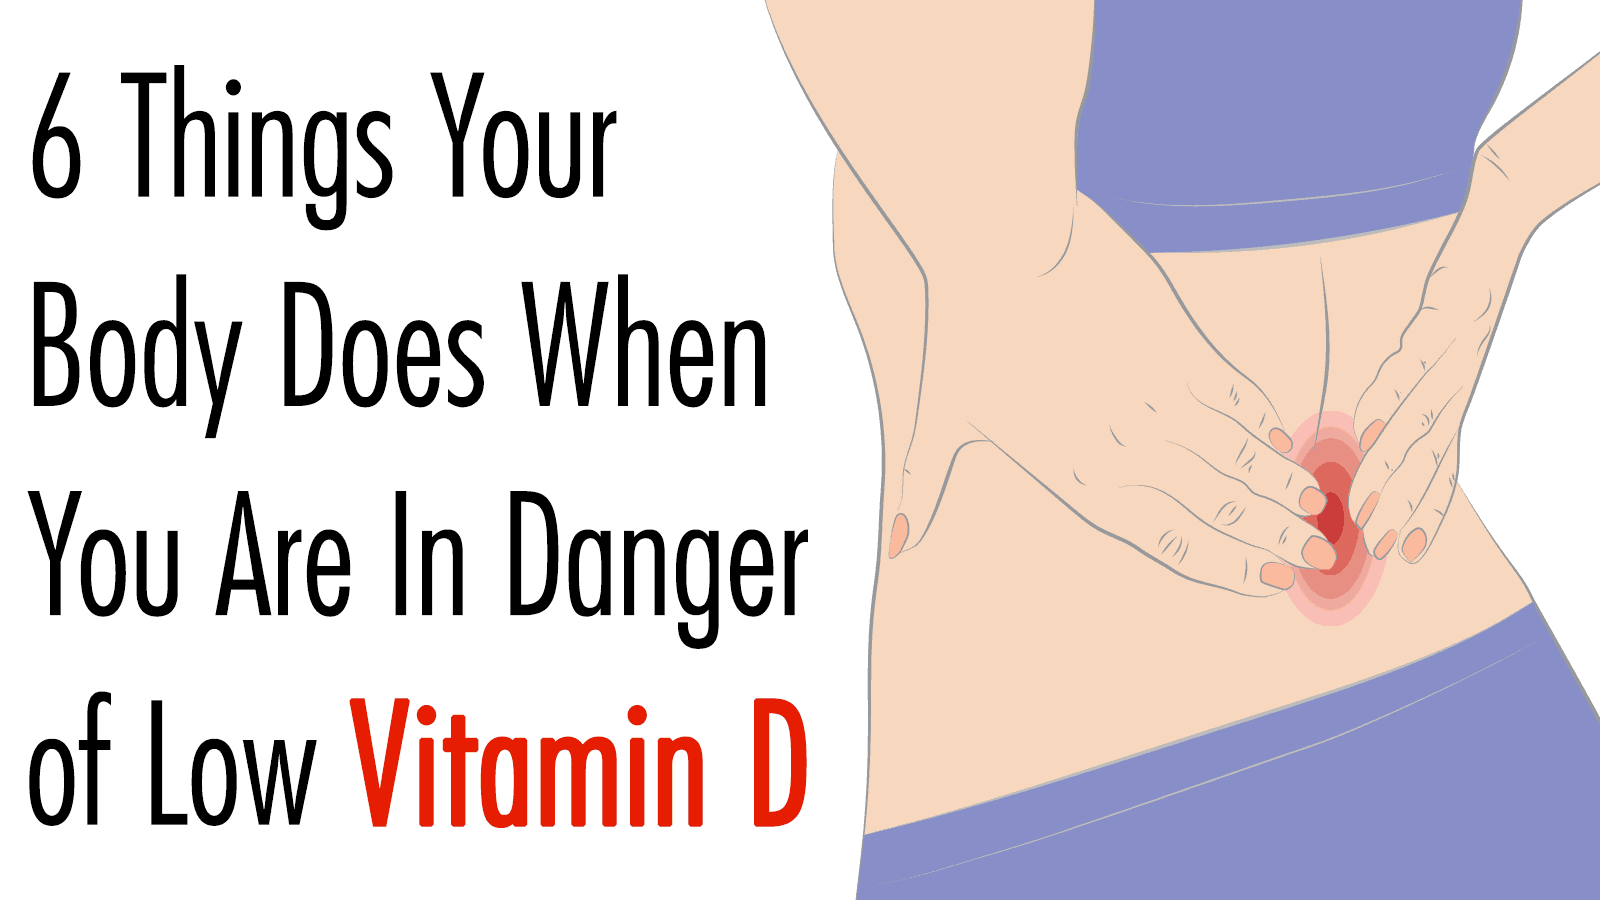 6 Things Your Body Does When You Are In Danger of Low Vitamin D